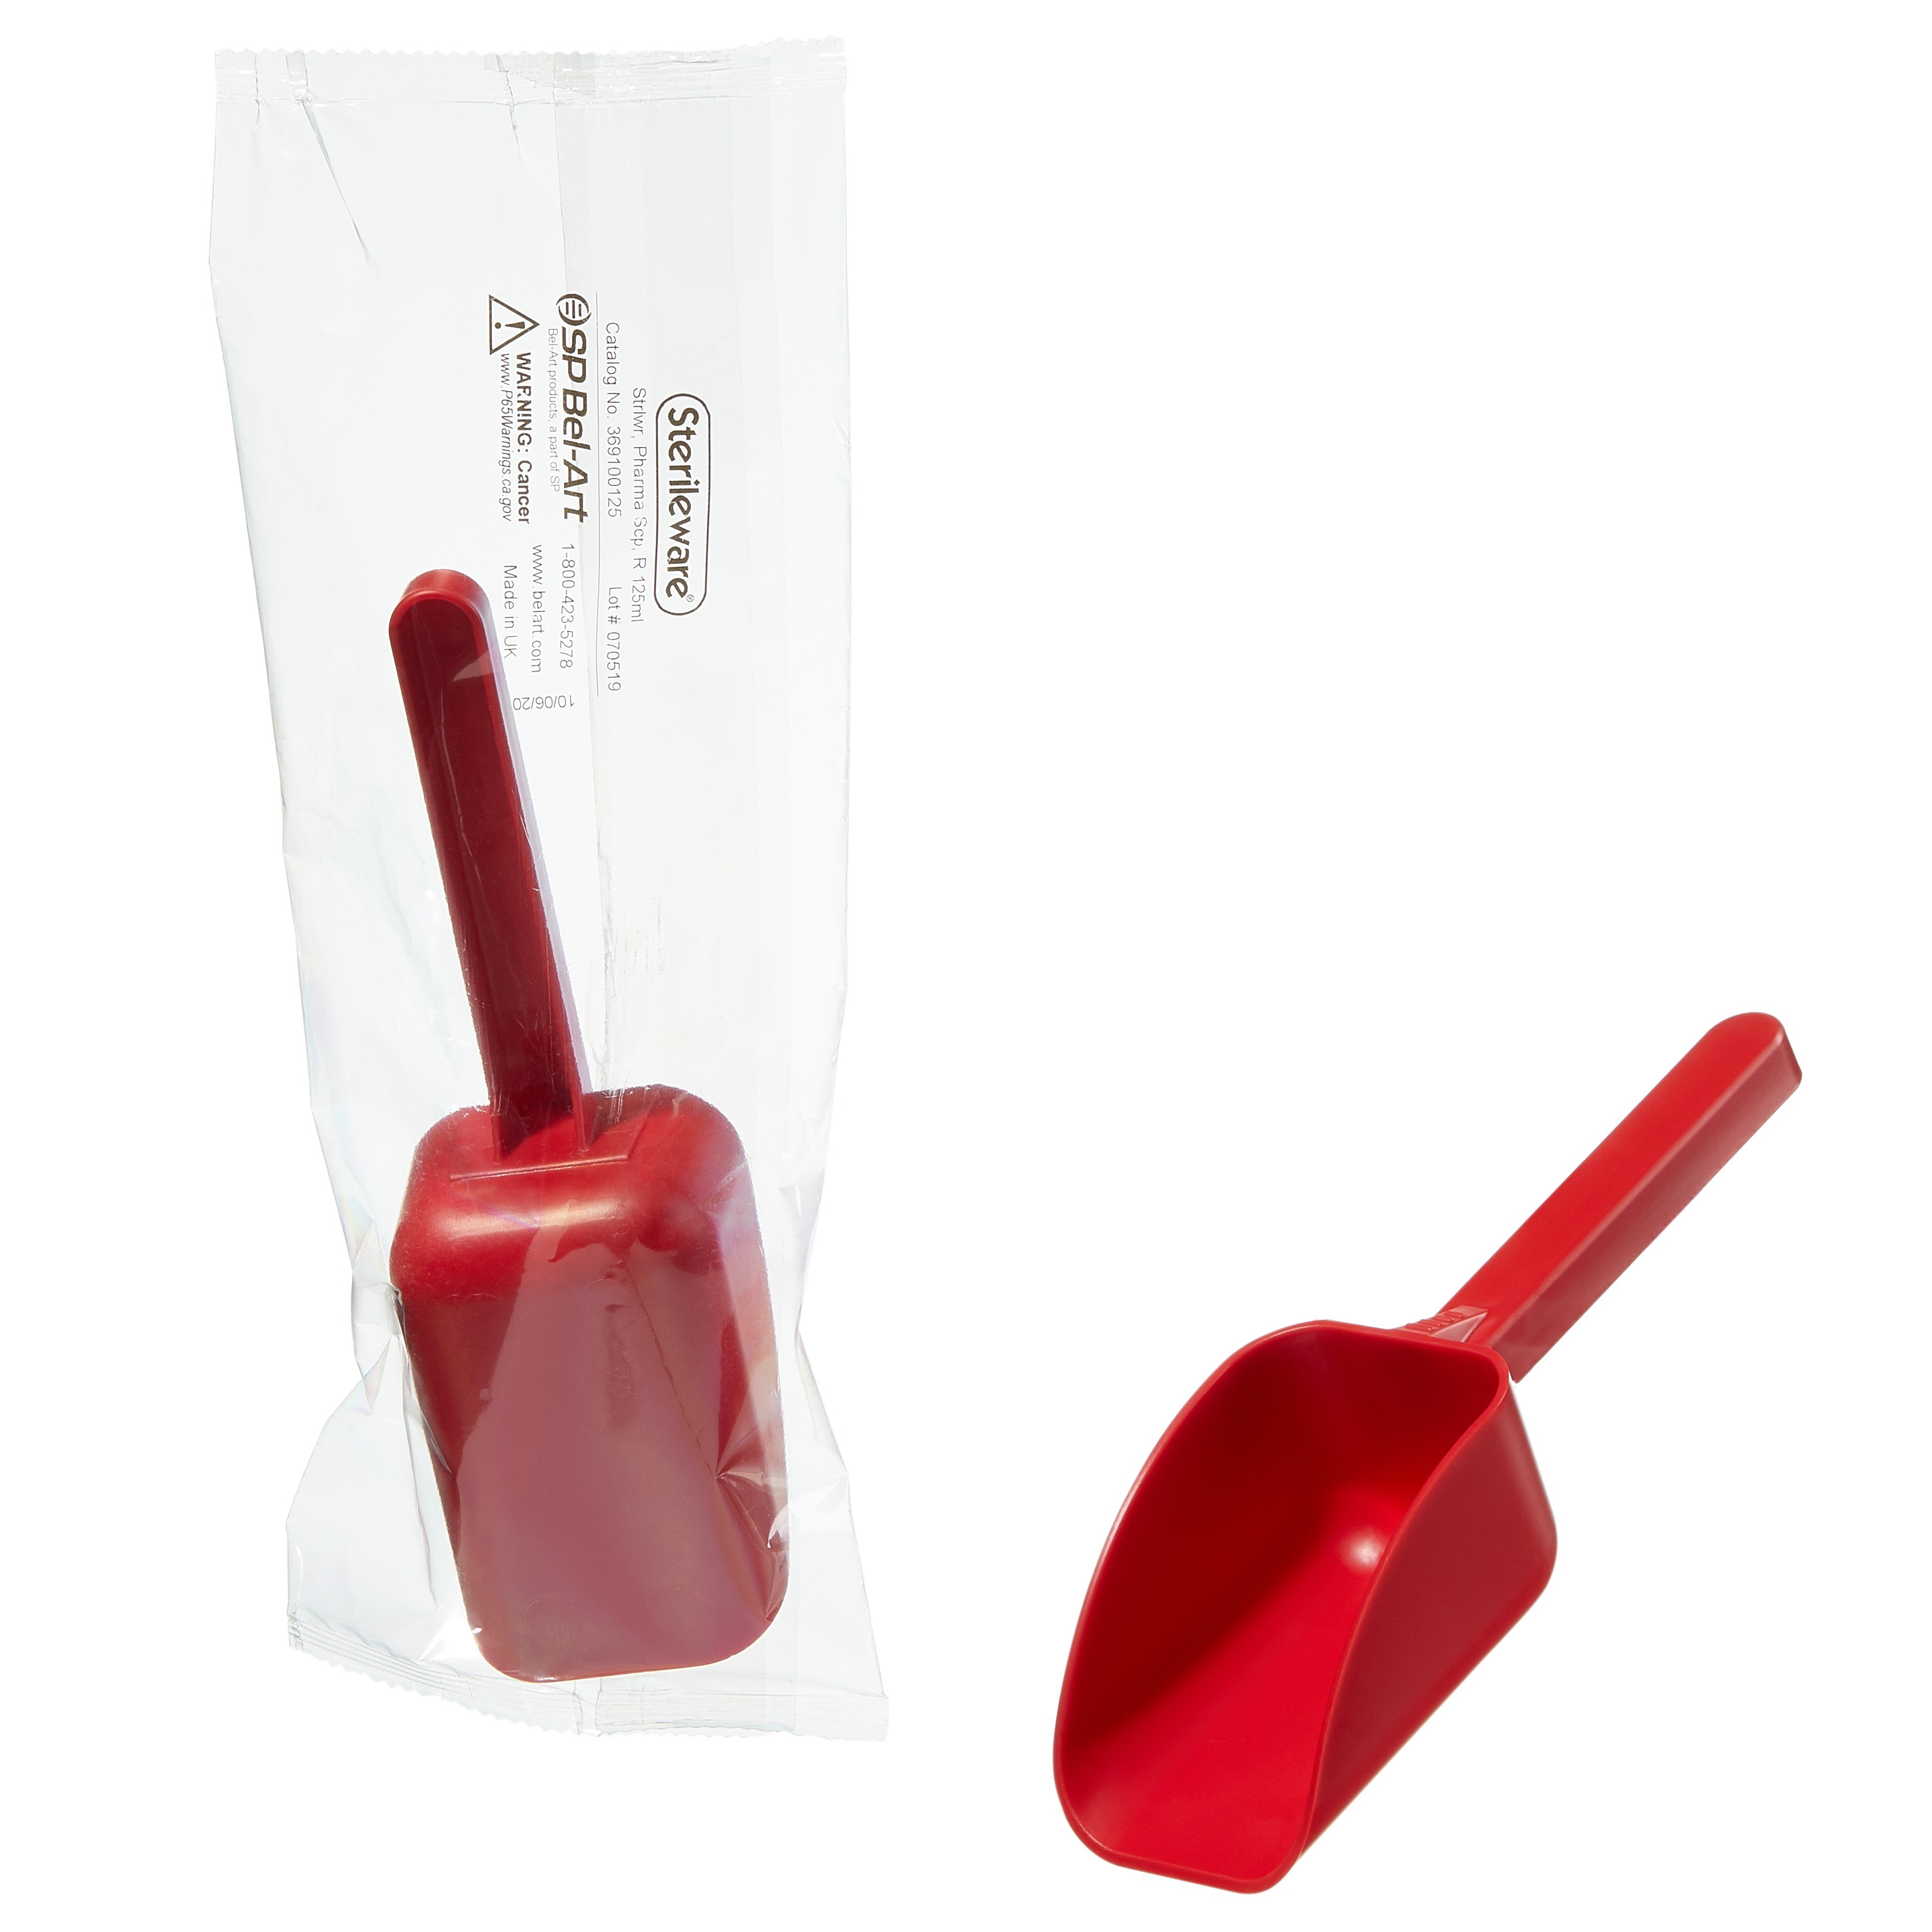 Sterileware Pharma Scoops - Red; 125ml (4oz), Individually Wrapped (Pack of 100)